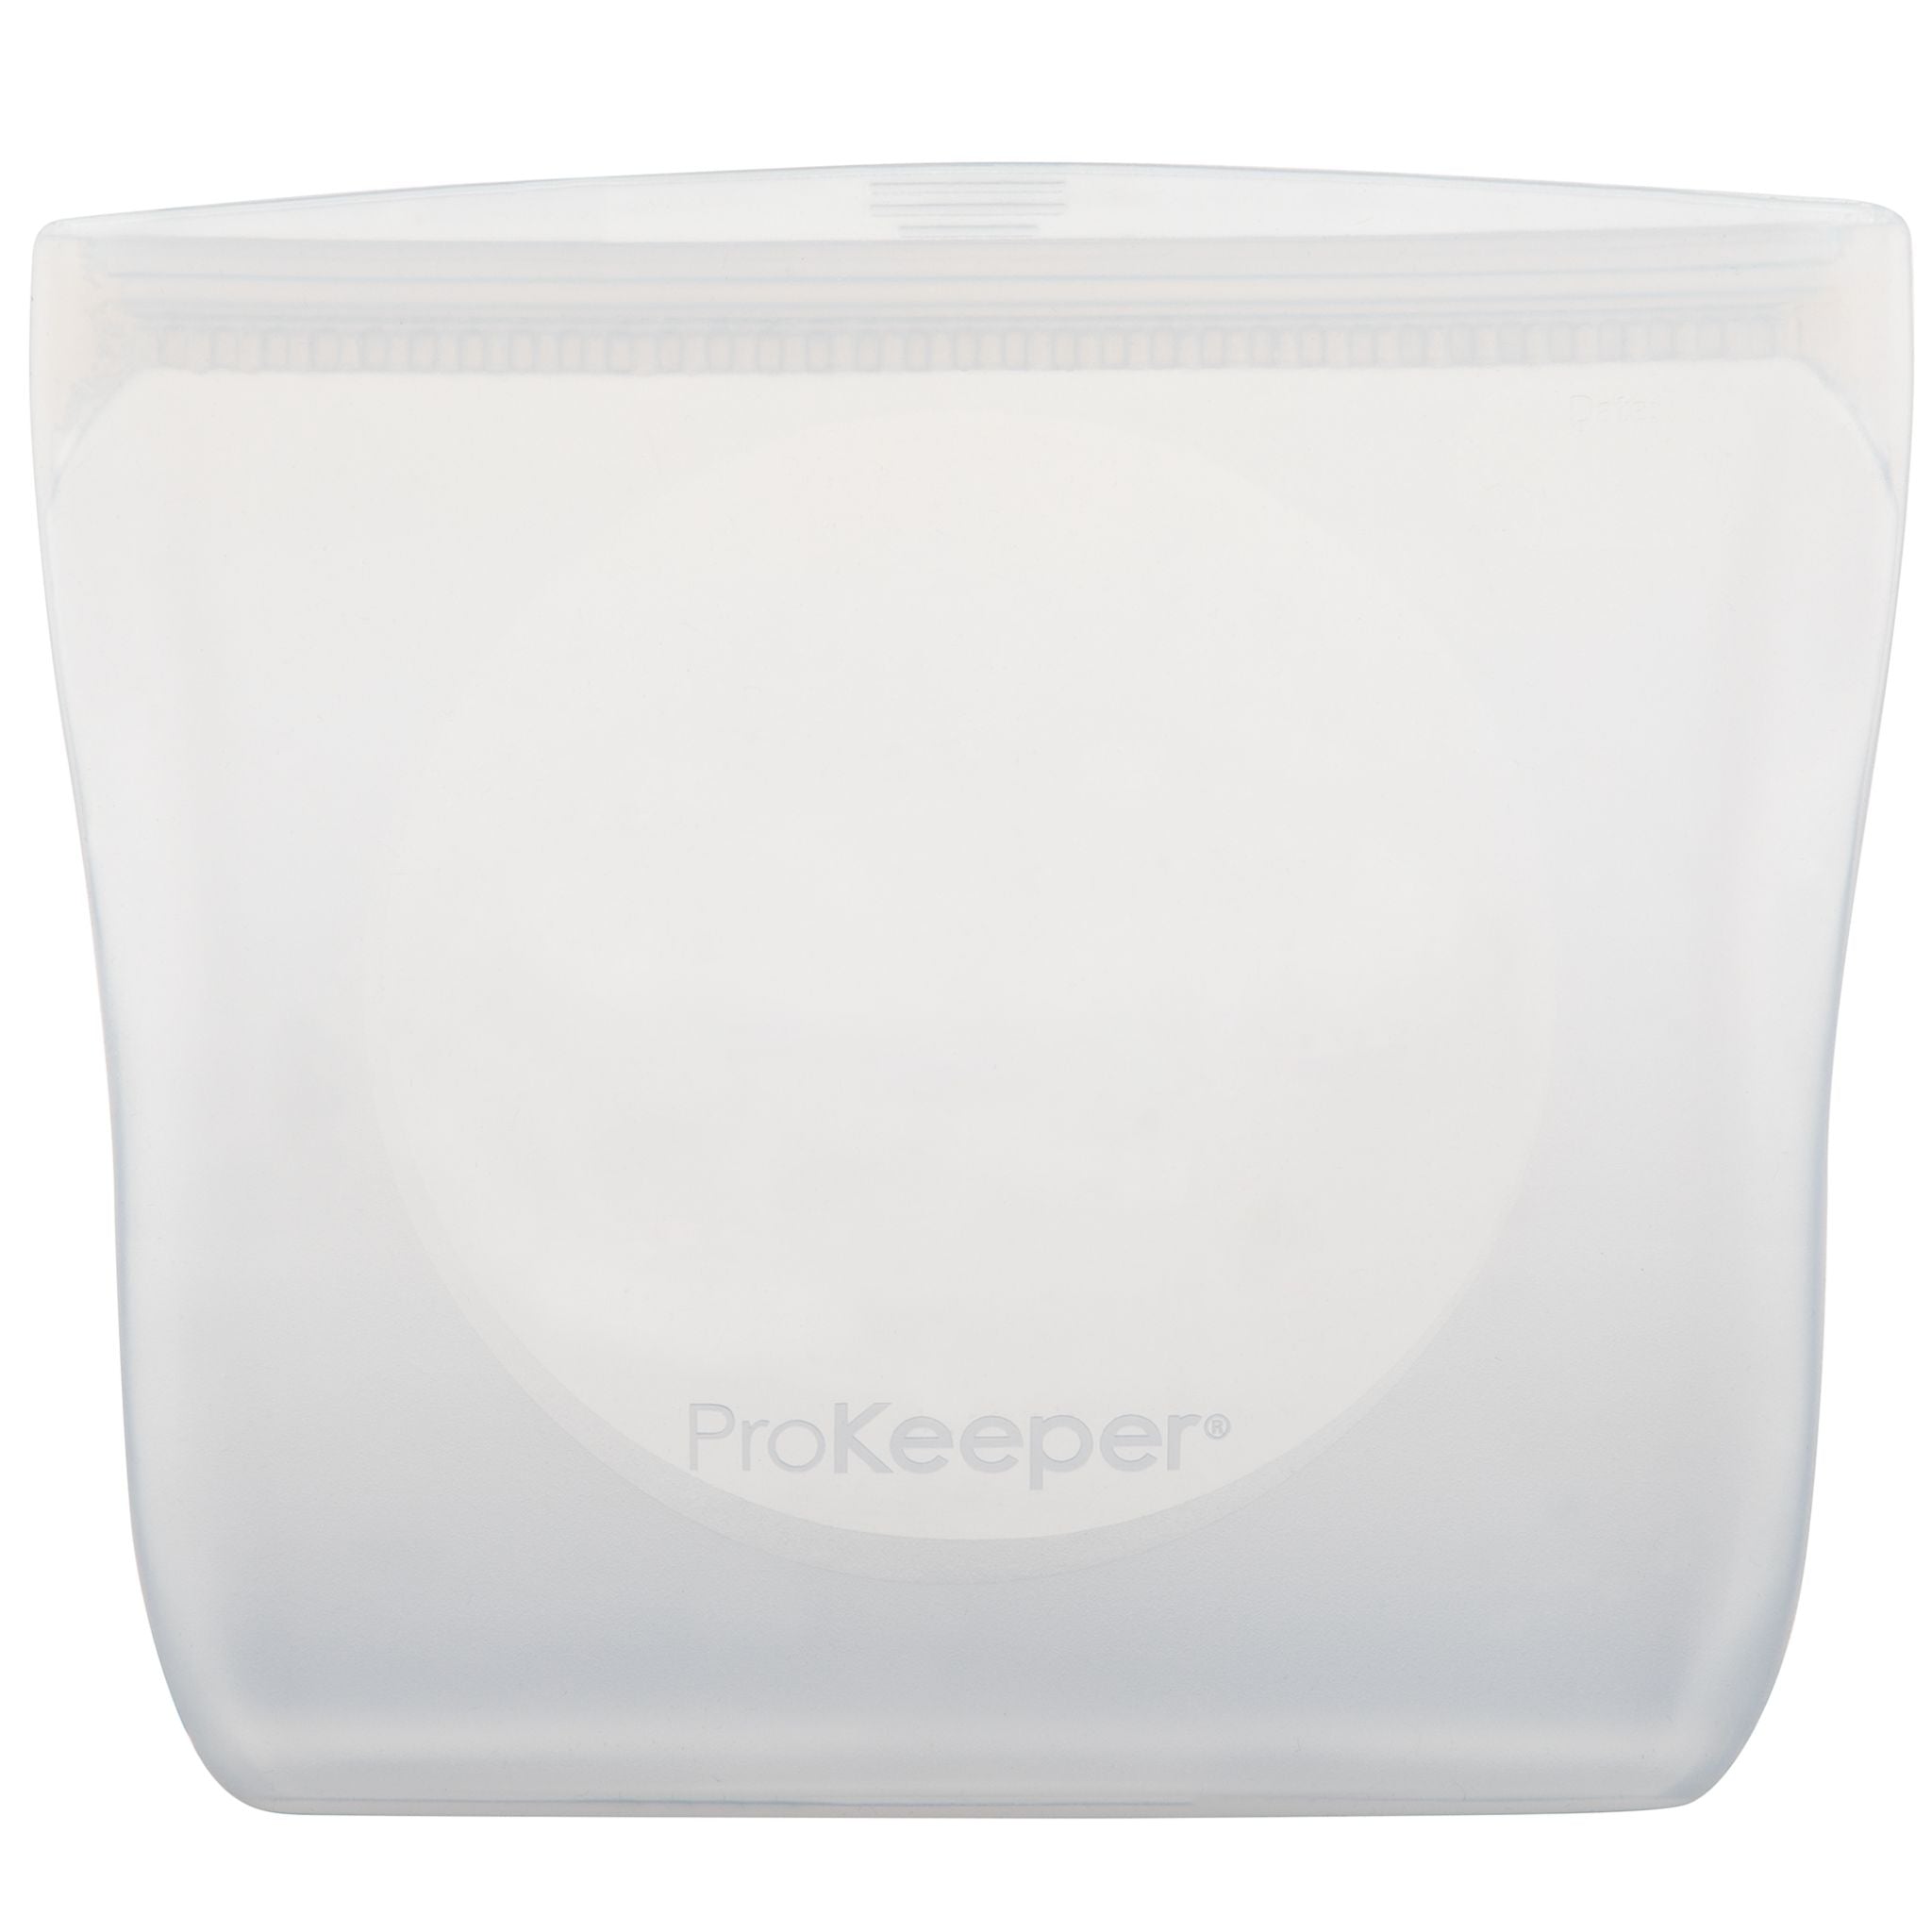 Progressive 3 Cup Silicone Prokeeper Bag Clear Og Singapore